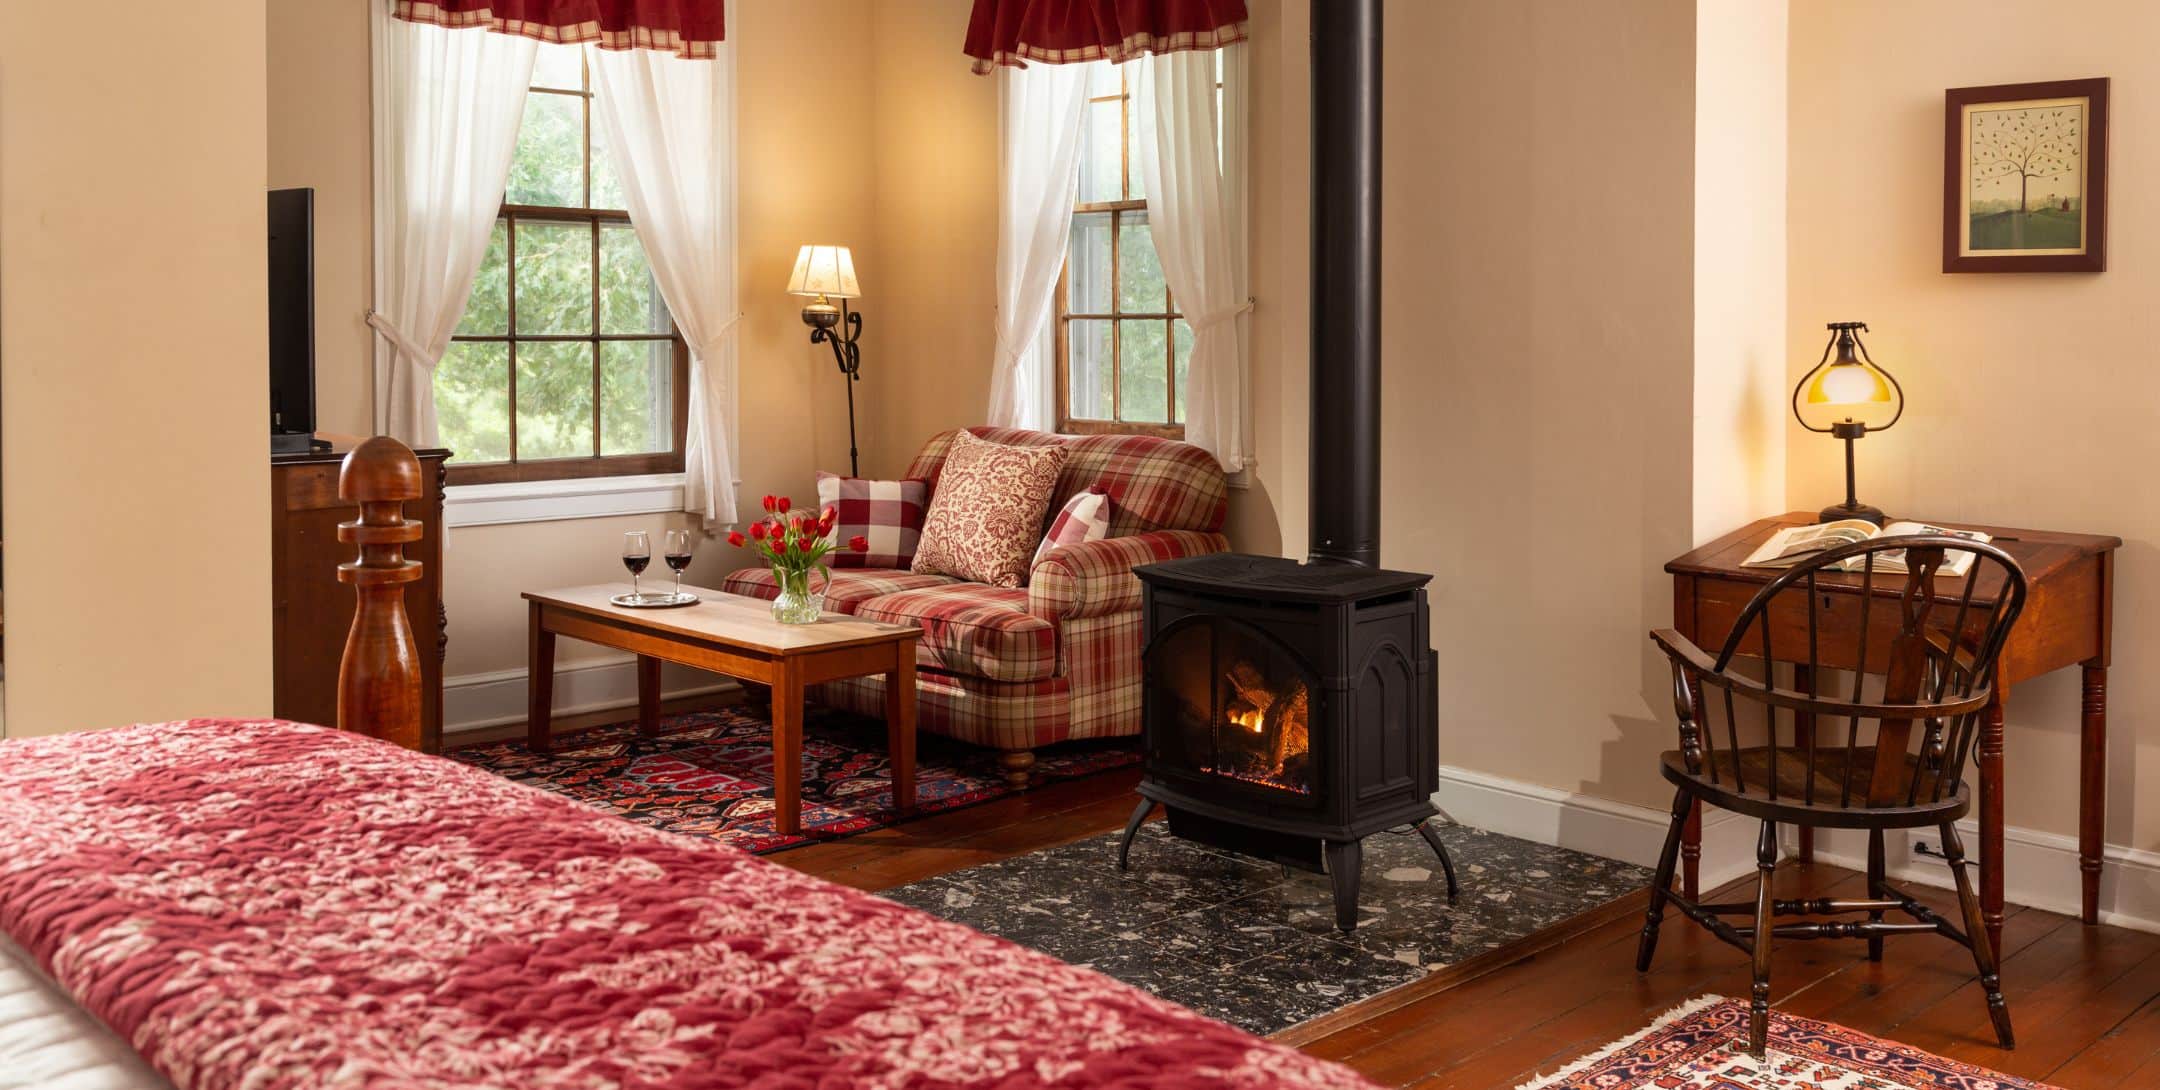 Red room with beige walls, red plaid love seat in sitting area with TV and fire stove, hardwood floors